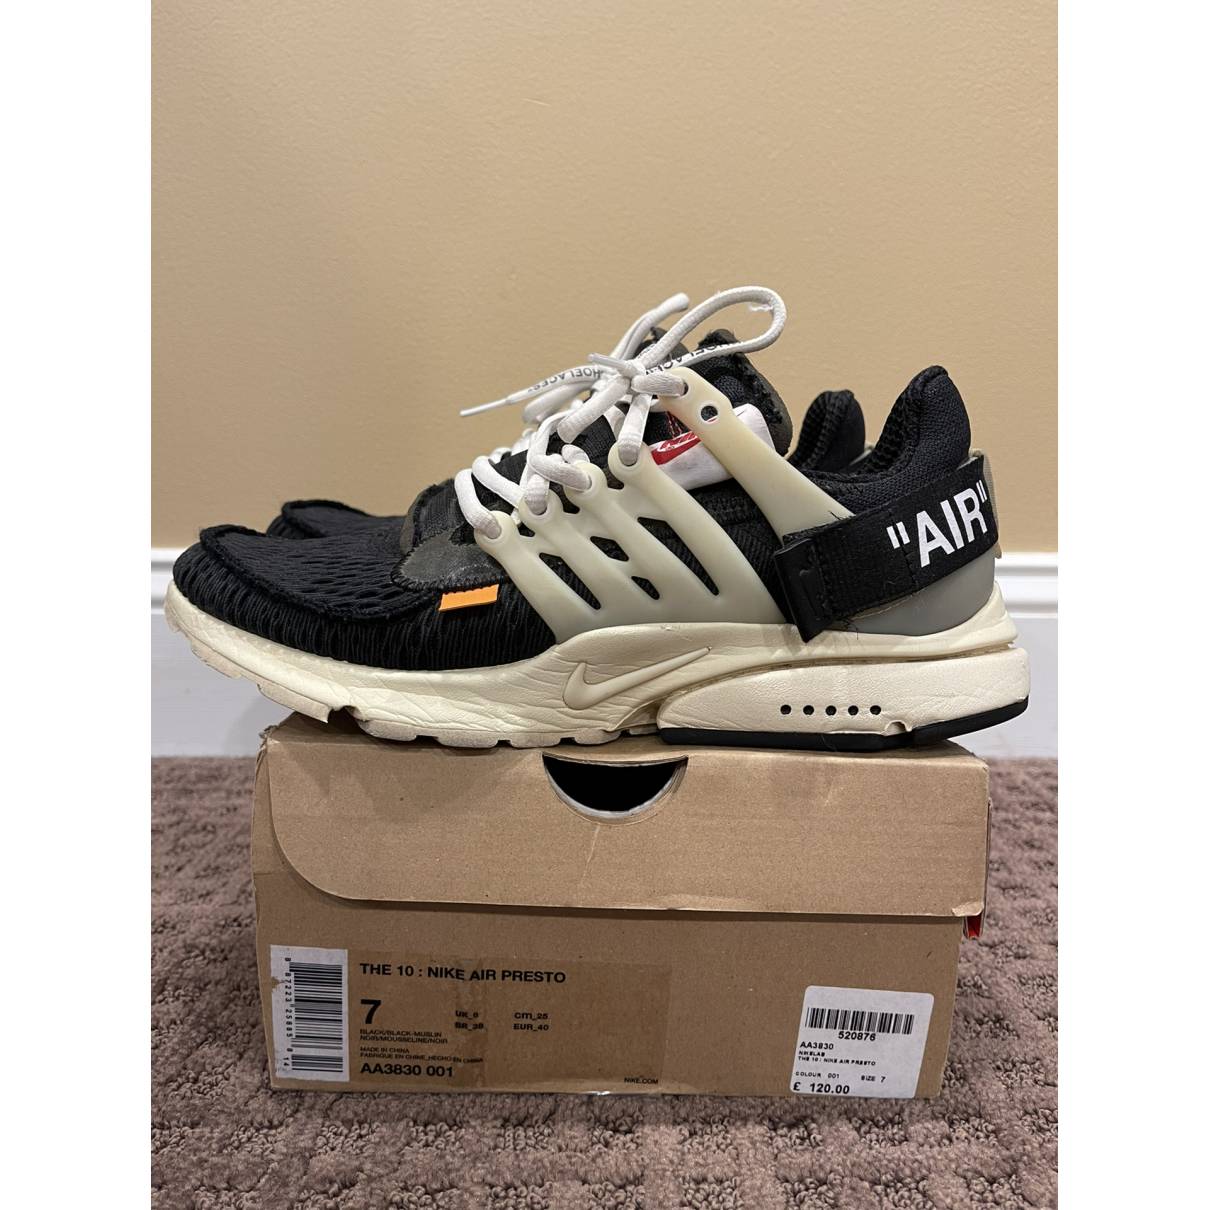 Air presto low trainers Nike x Off-White Black size 7 US in Other - 23696581